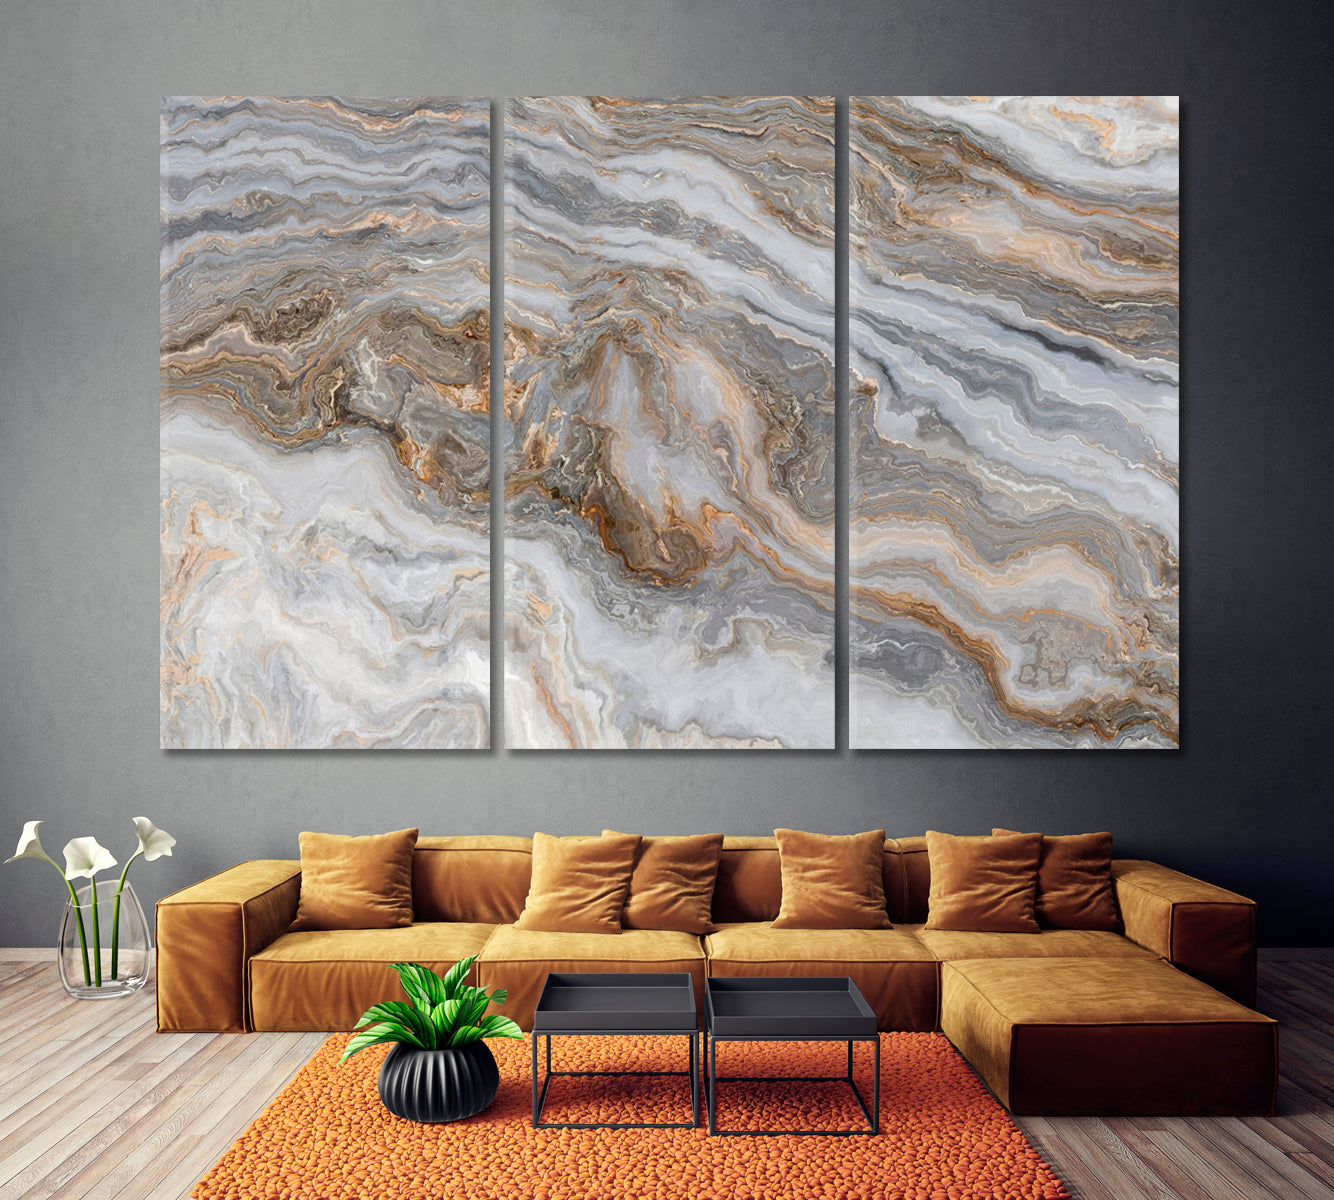 Marble with Curly Veins Canvas Print ArtLexy 3 Panels 36"x24" inches 